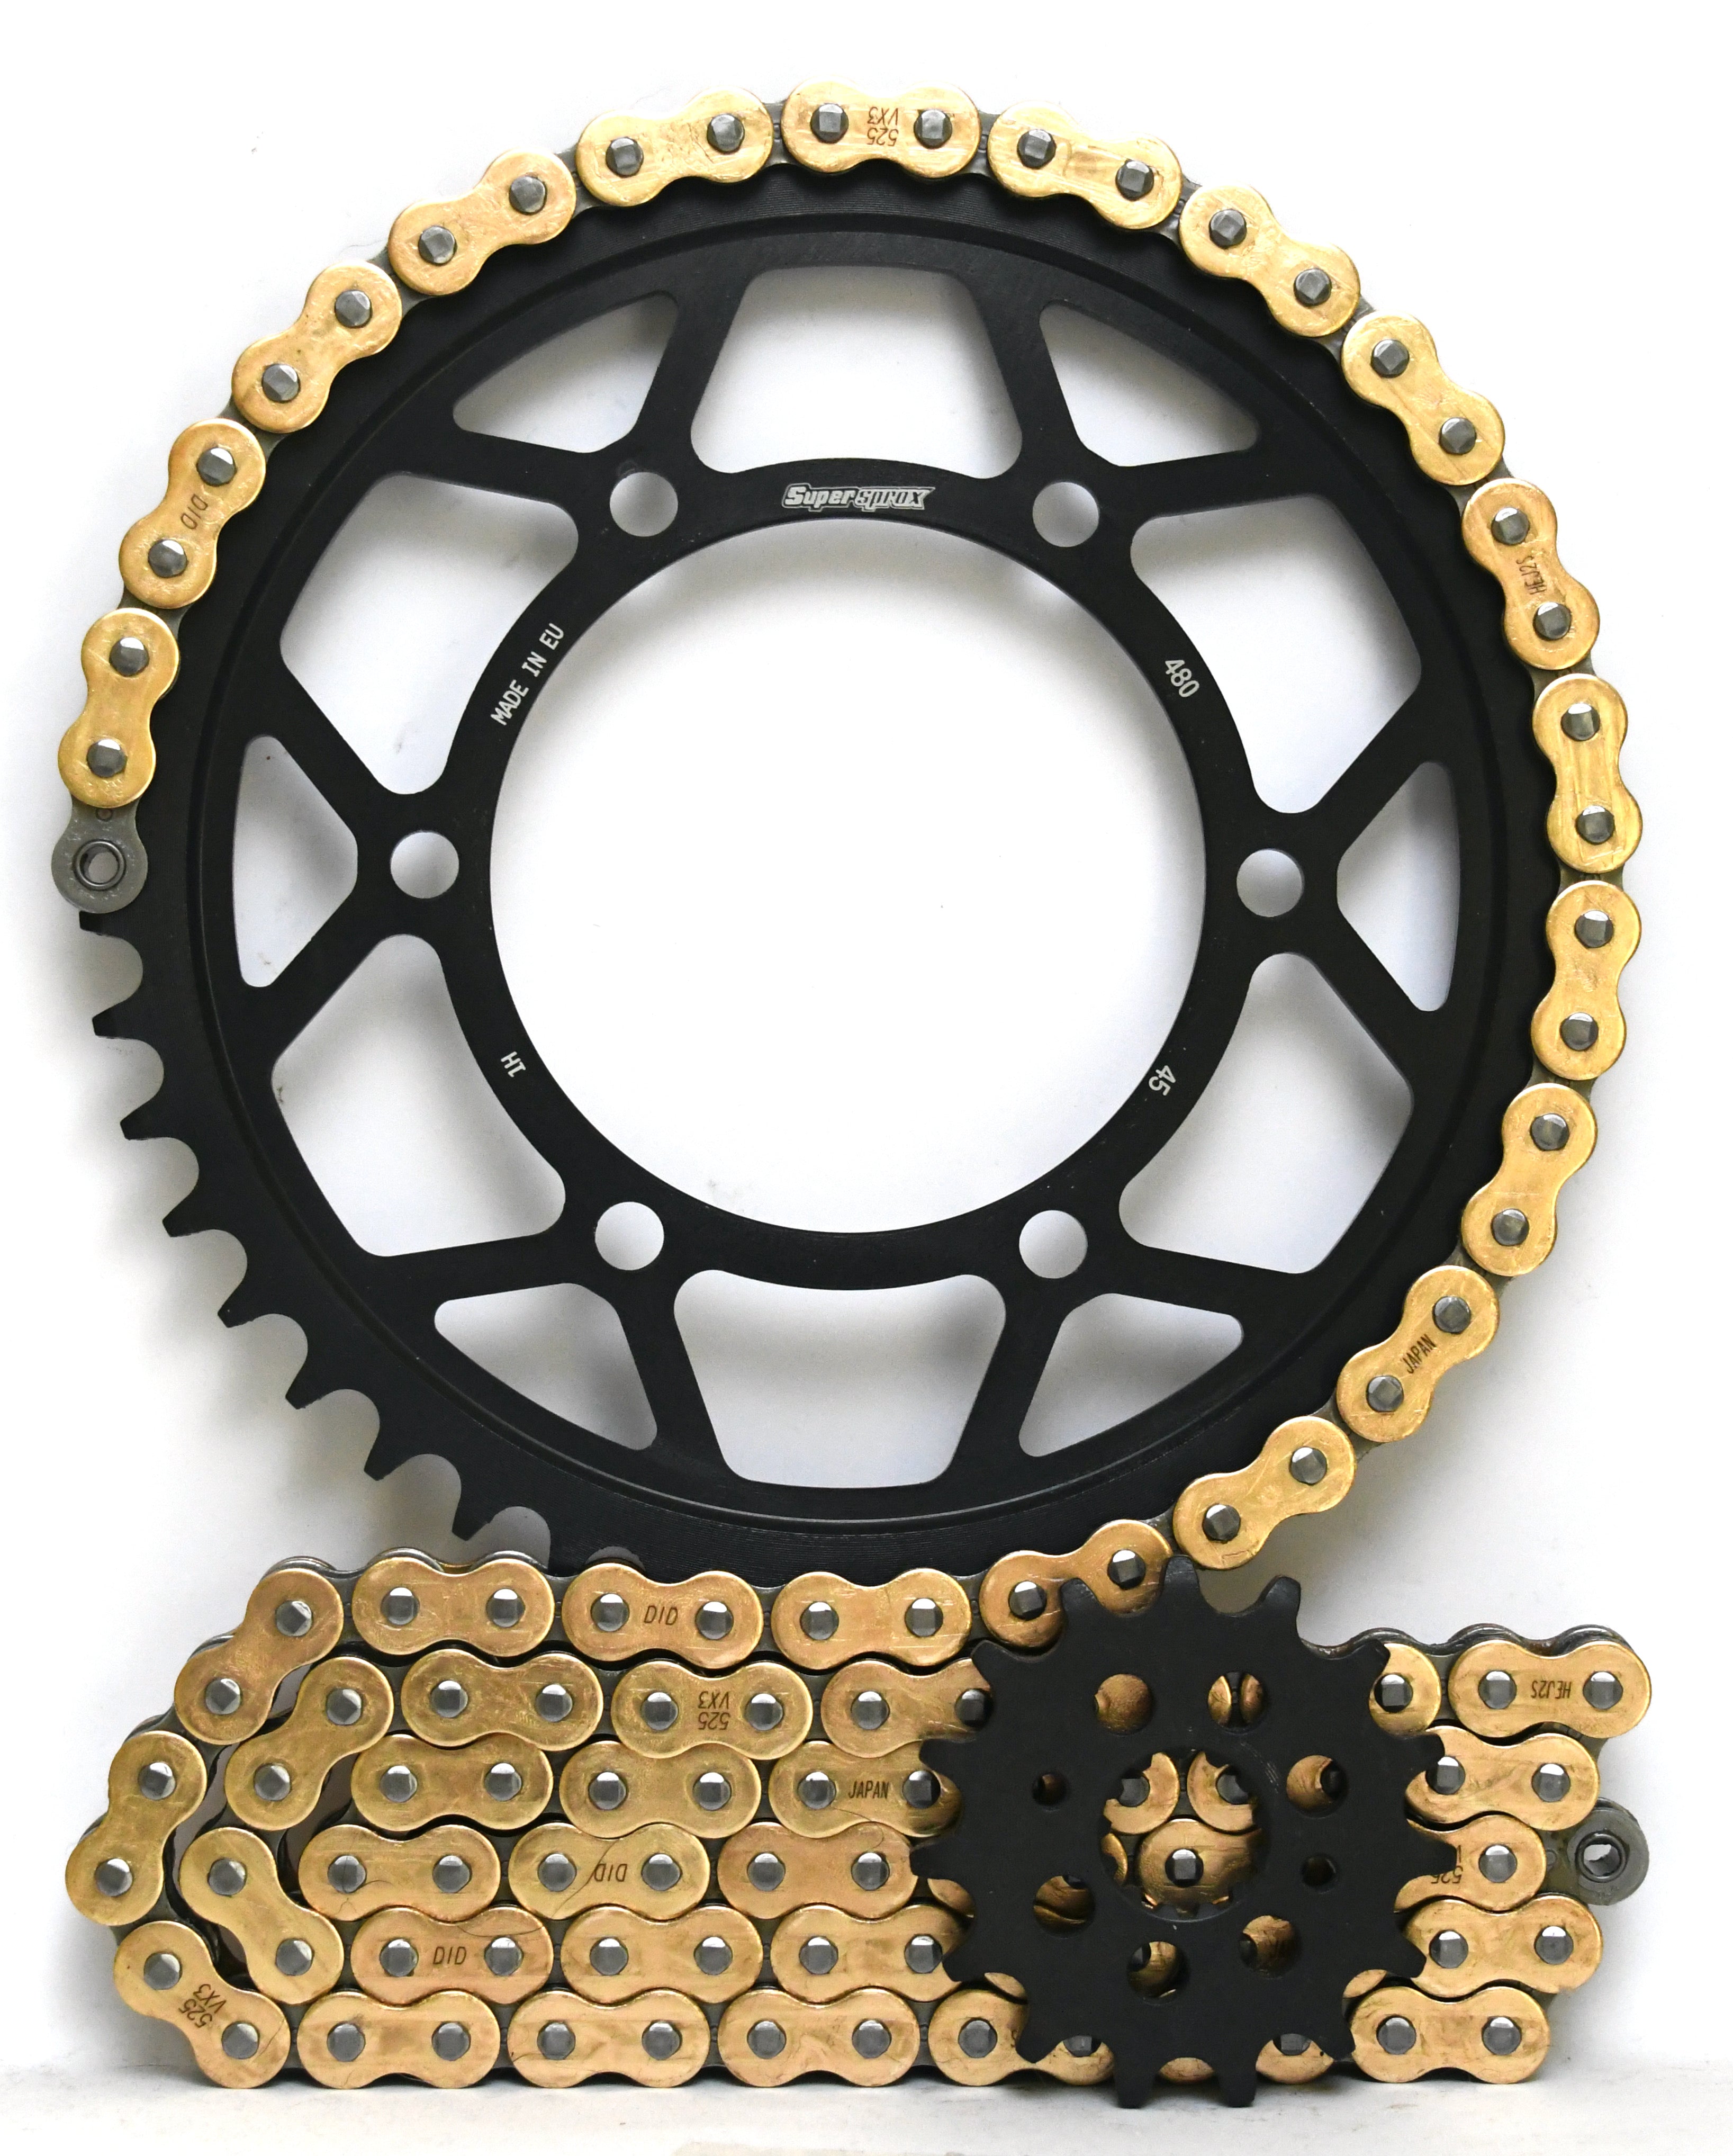 Supersprox Chain & Steel Sprocket Kit for Yamaha YZF R1 2004-2005 - Standard Gearing